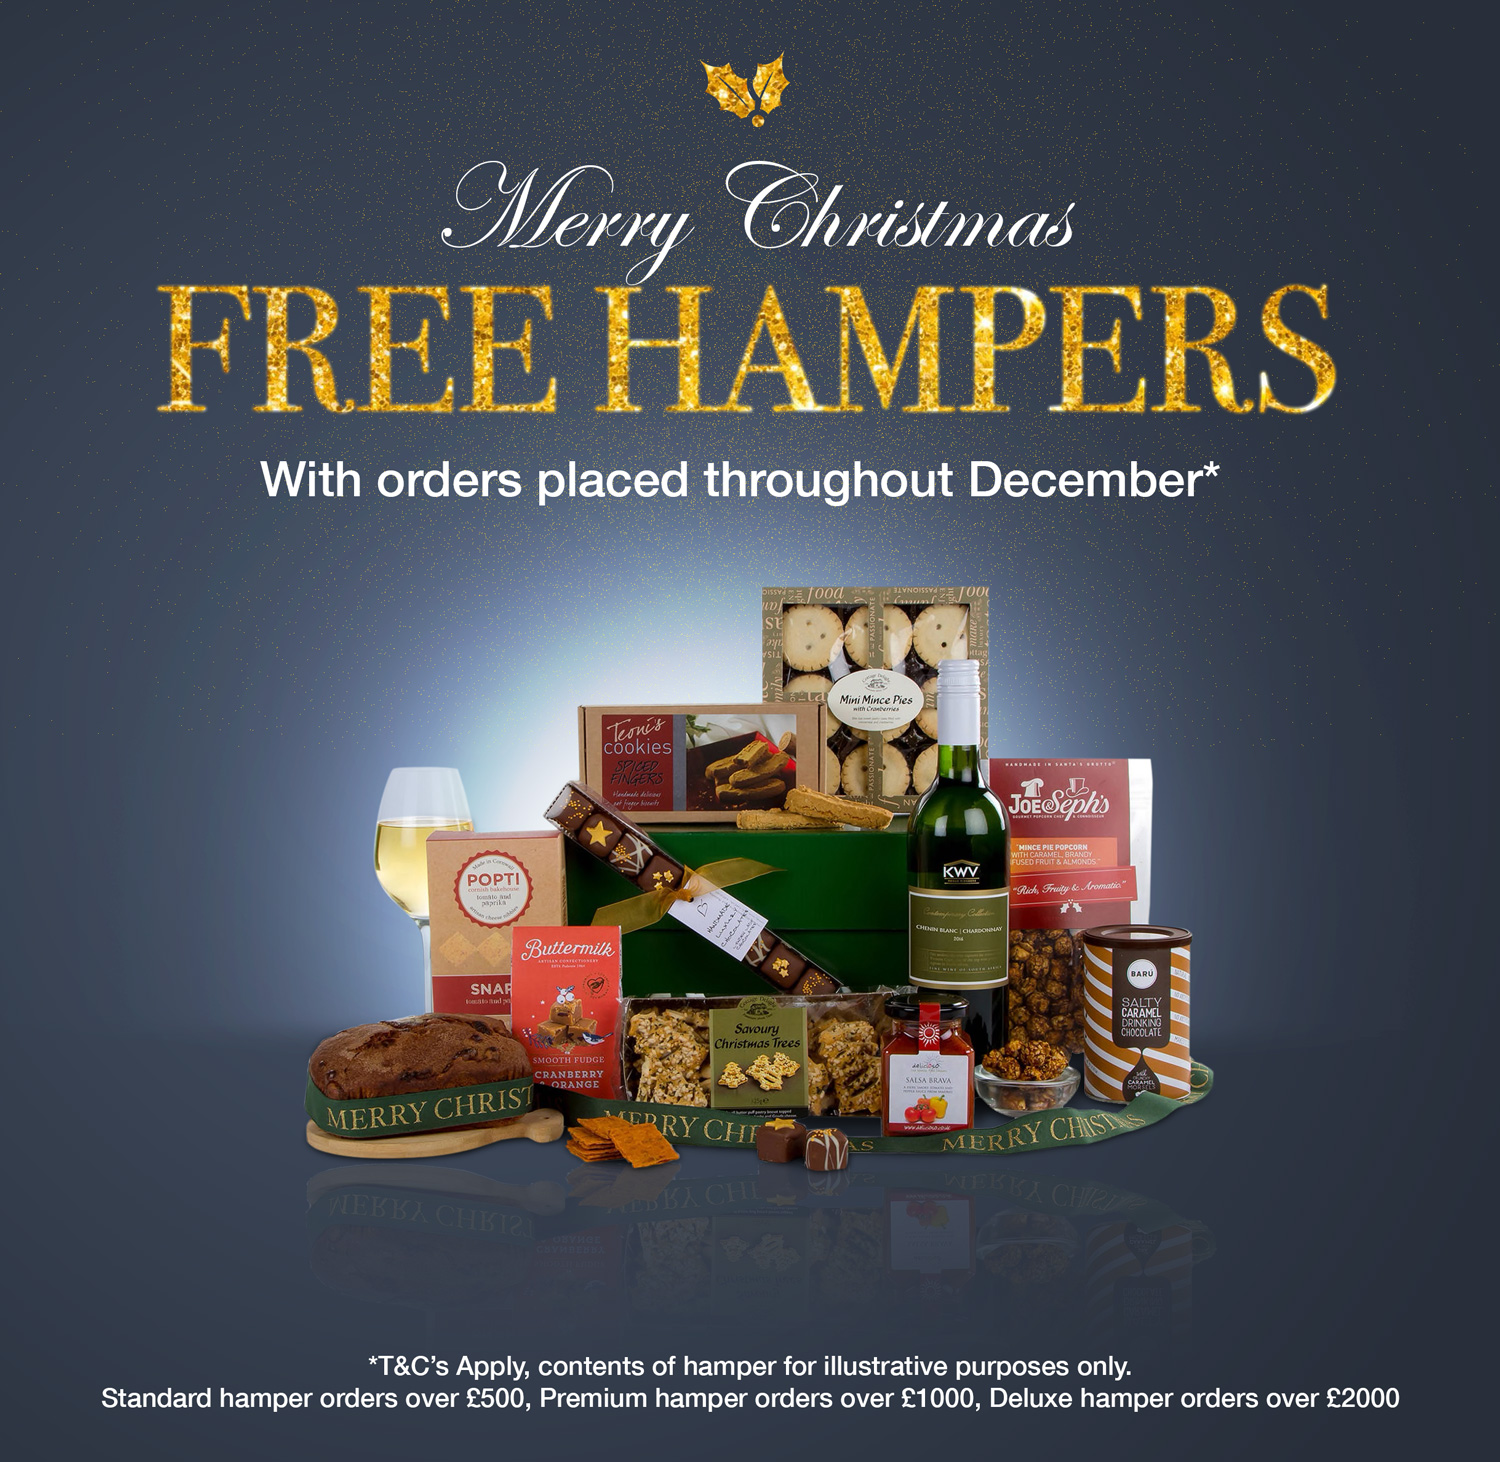 FREE Hampers with orders placed throughout December